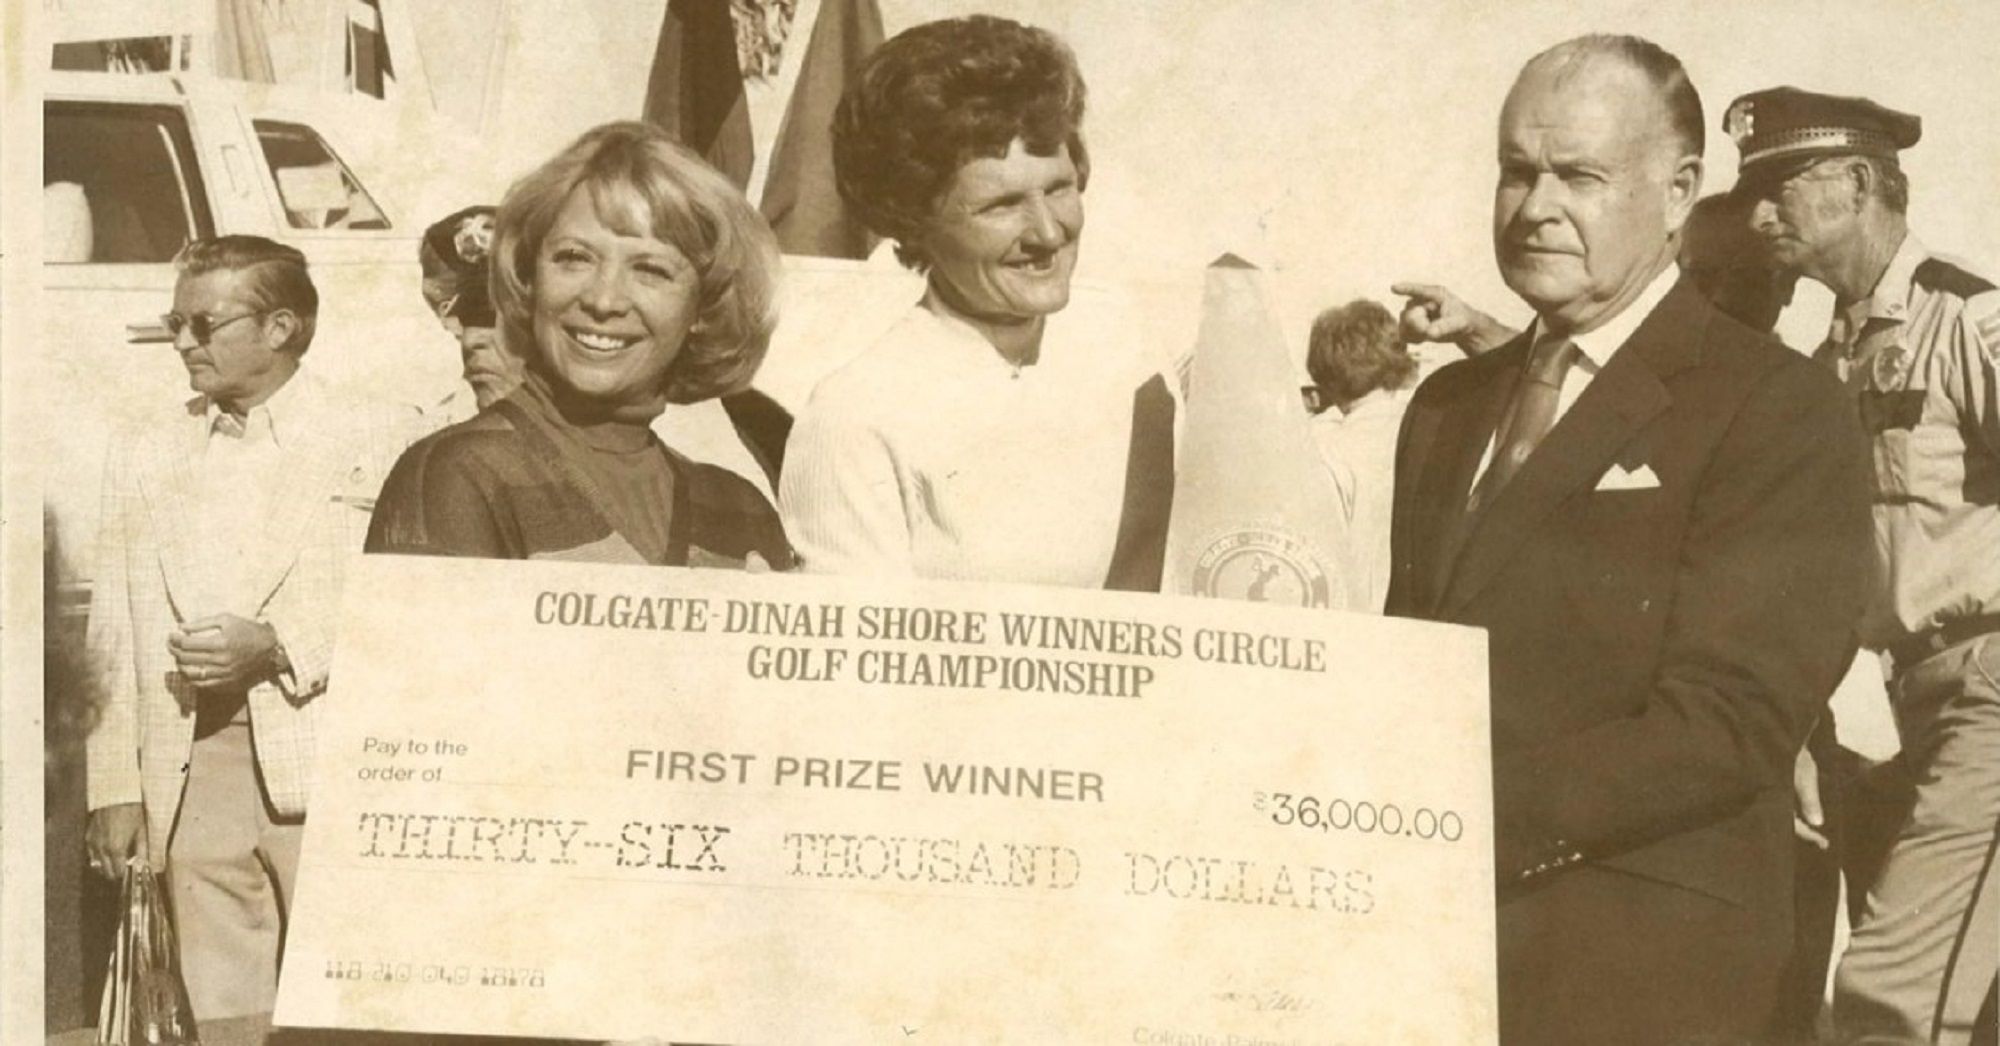 A picture of David Foster presenting the winners check at the Colgate Dinah Shore Winners Circle golf championship